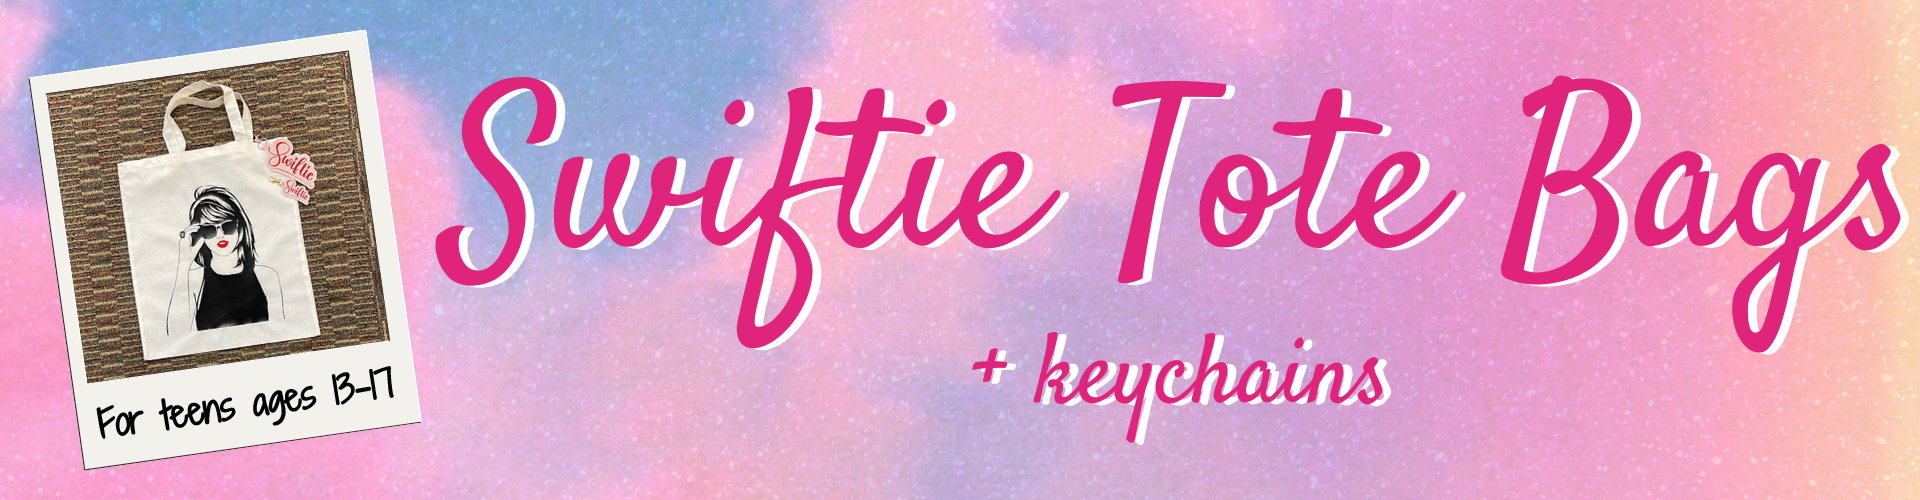 Swiftie Tote Bags + keychains with taylor swift tote bag in polaroid frame